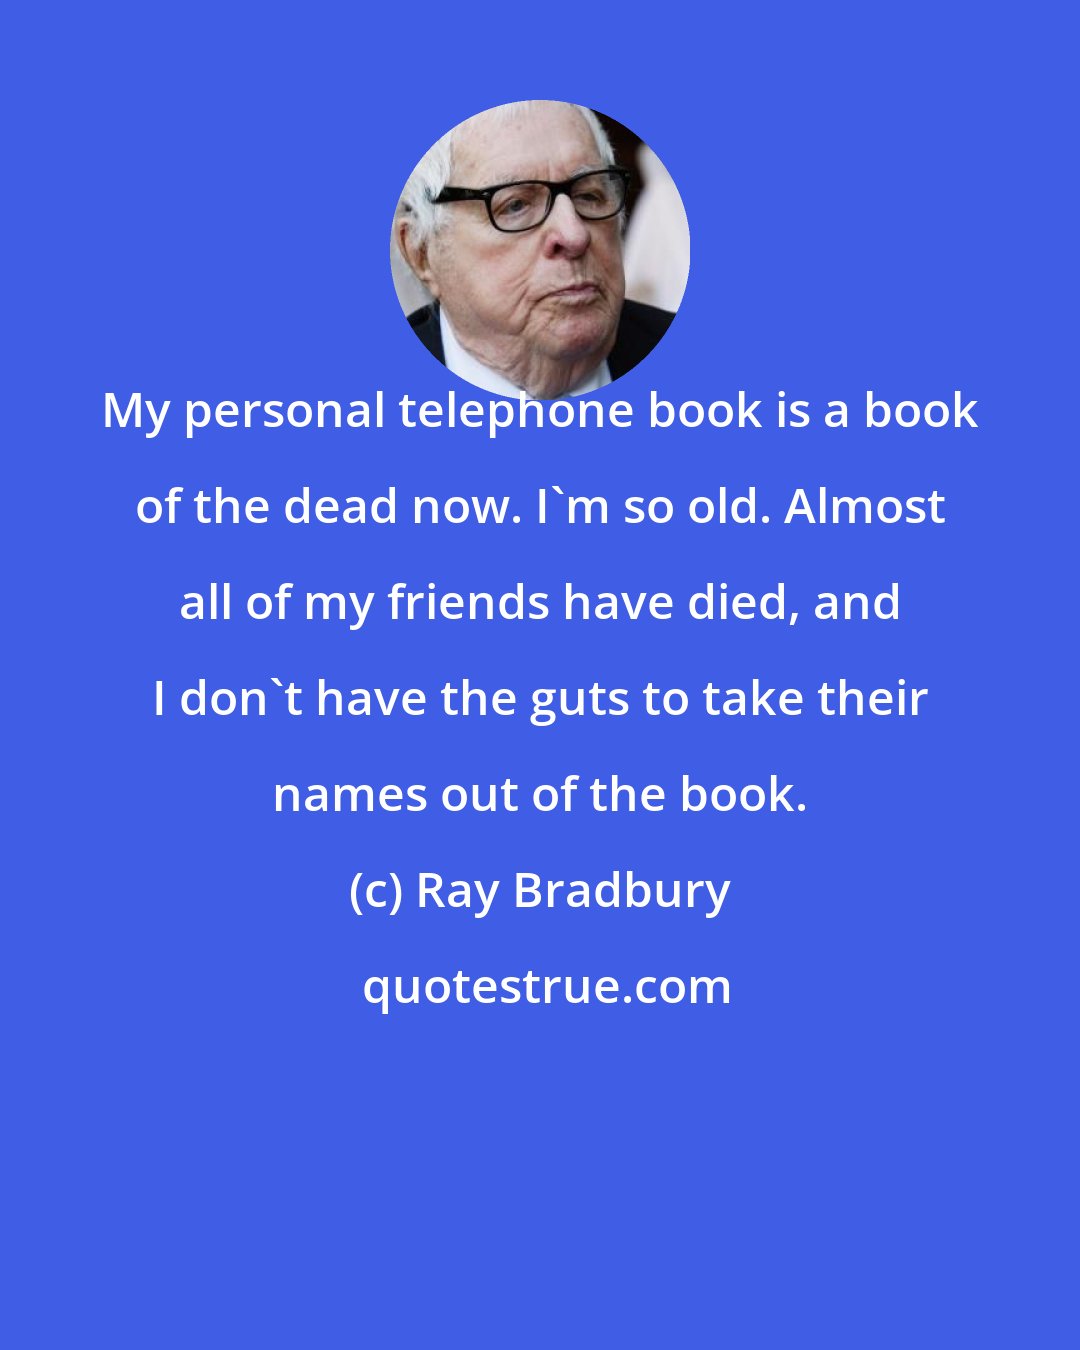 Ray Bradbury: My personal telephone book is a book of the dead now. I'm so old. Almost all of my friends have died, and I don't have the guts to take their names out of the book.